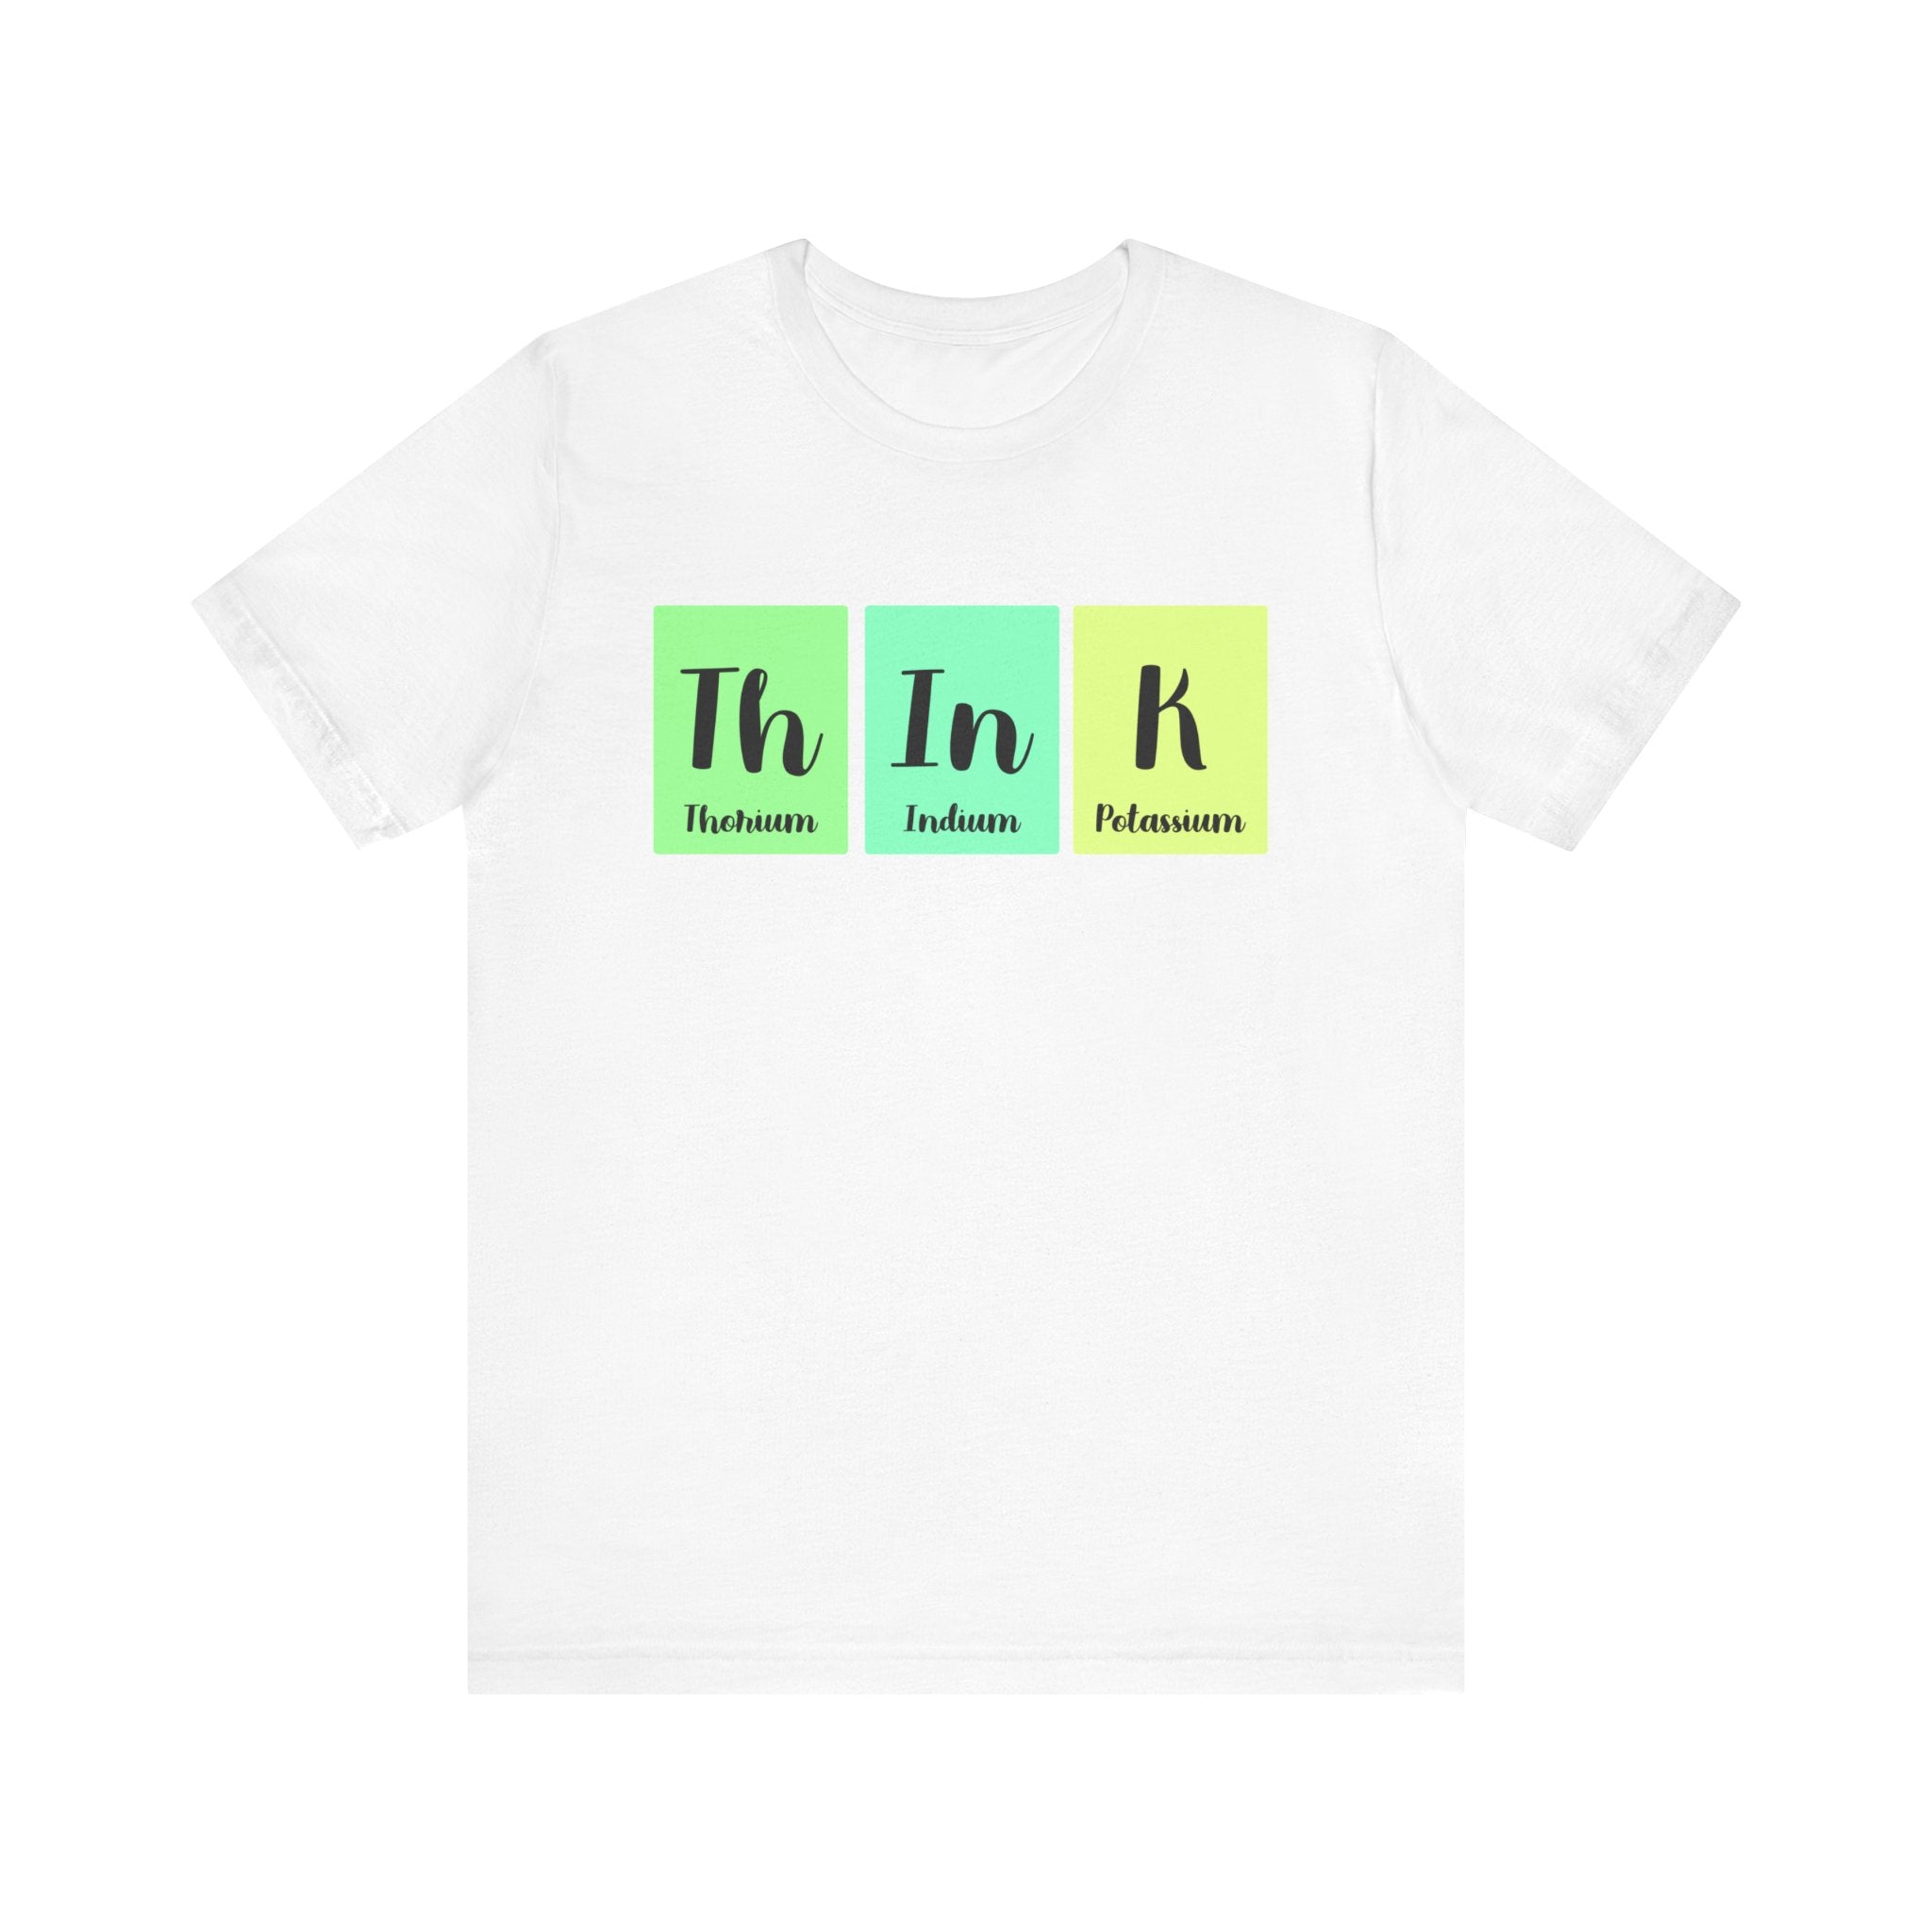 White unisex jersey tee with the Th-In-k elements arranged to spell "think" on the chest.